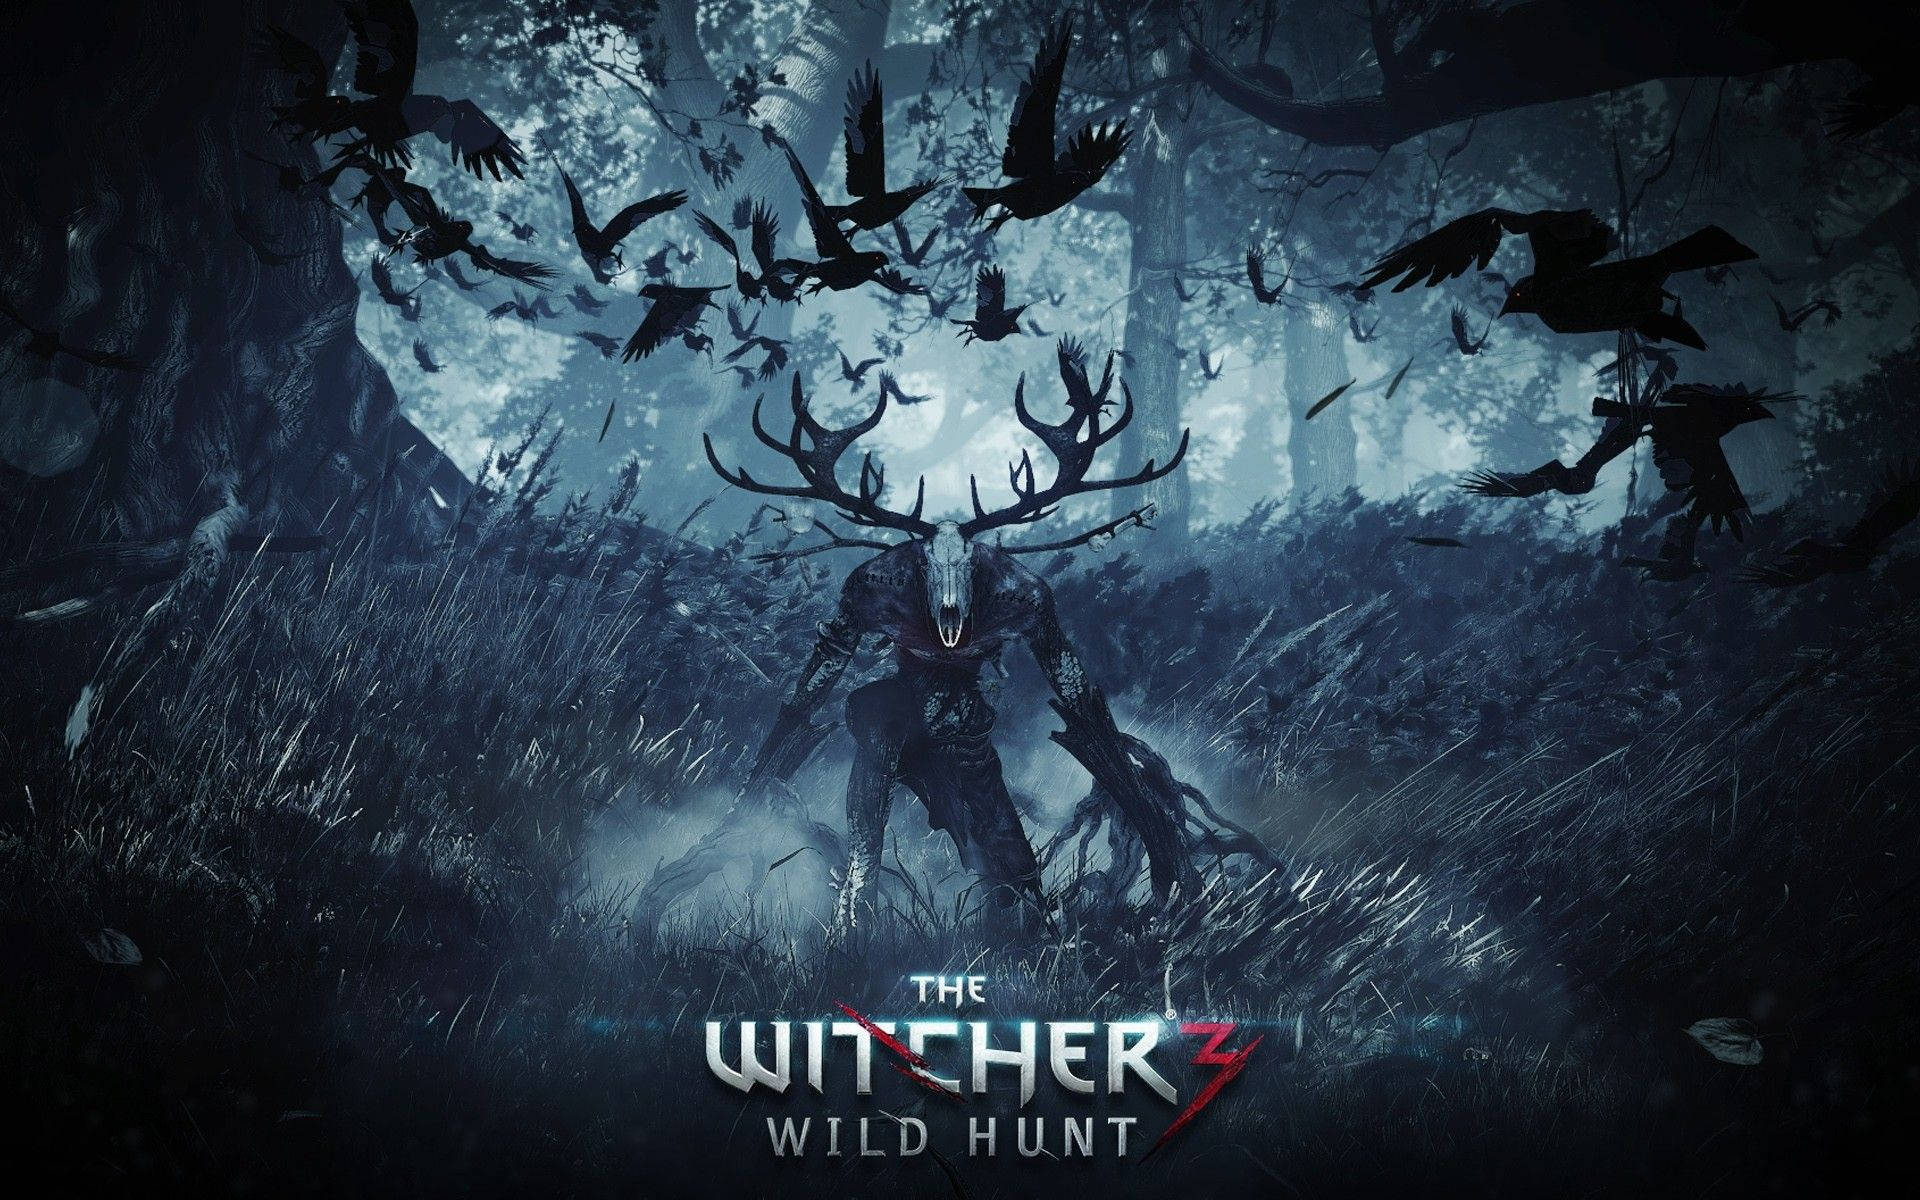 Join Geralt of Rivia on a new adventure in The Witcher 3: Wild Hunt Wallpaper